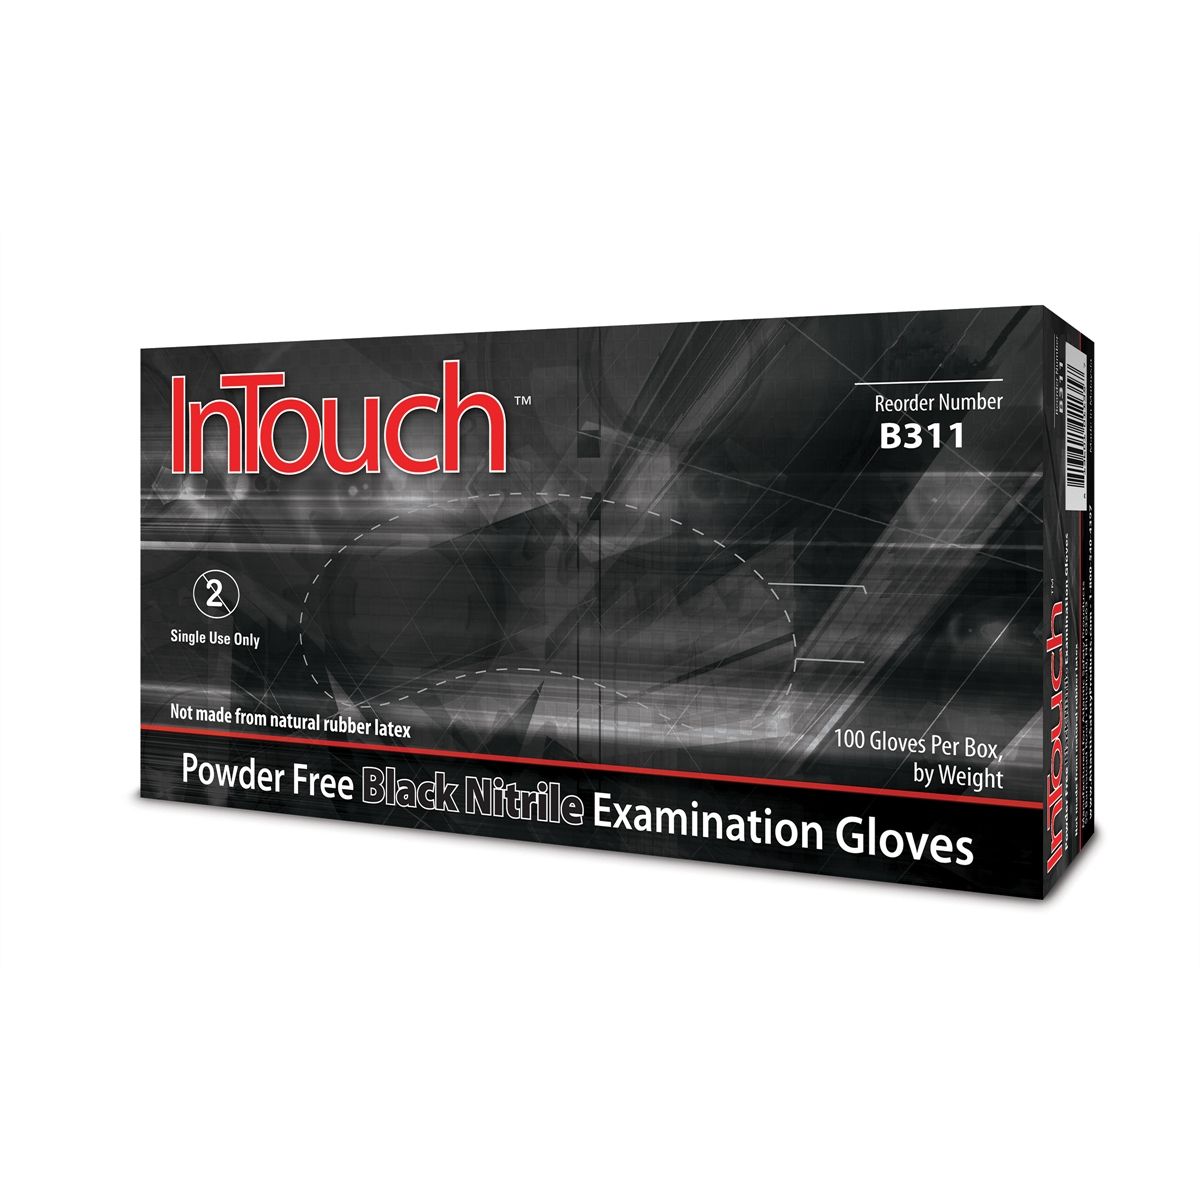 Small Intouch black nitrile glove Powder Free Exam 6MIL